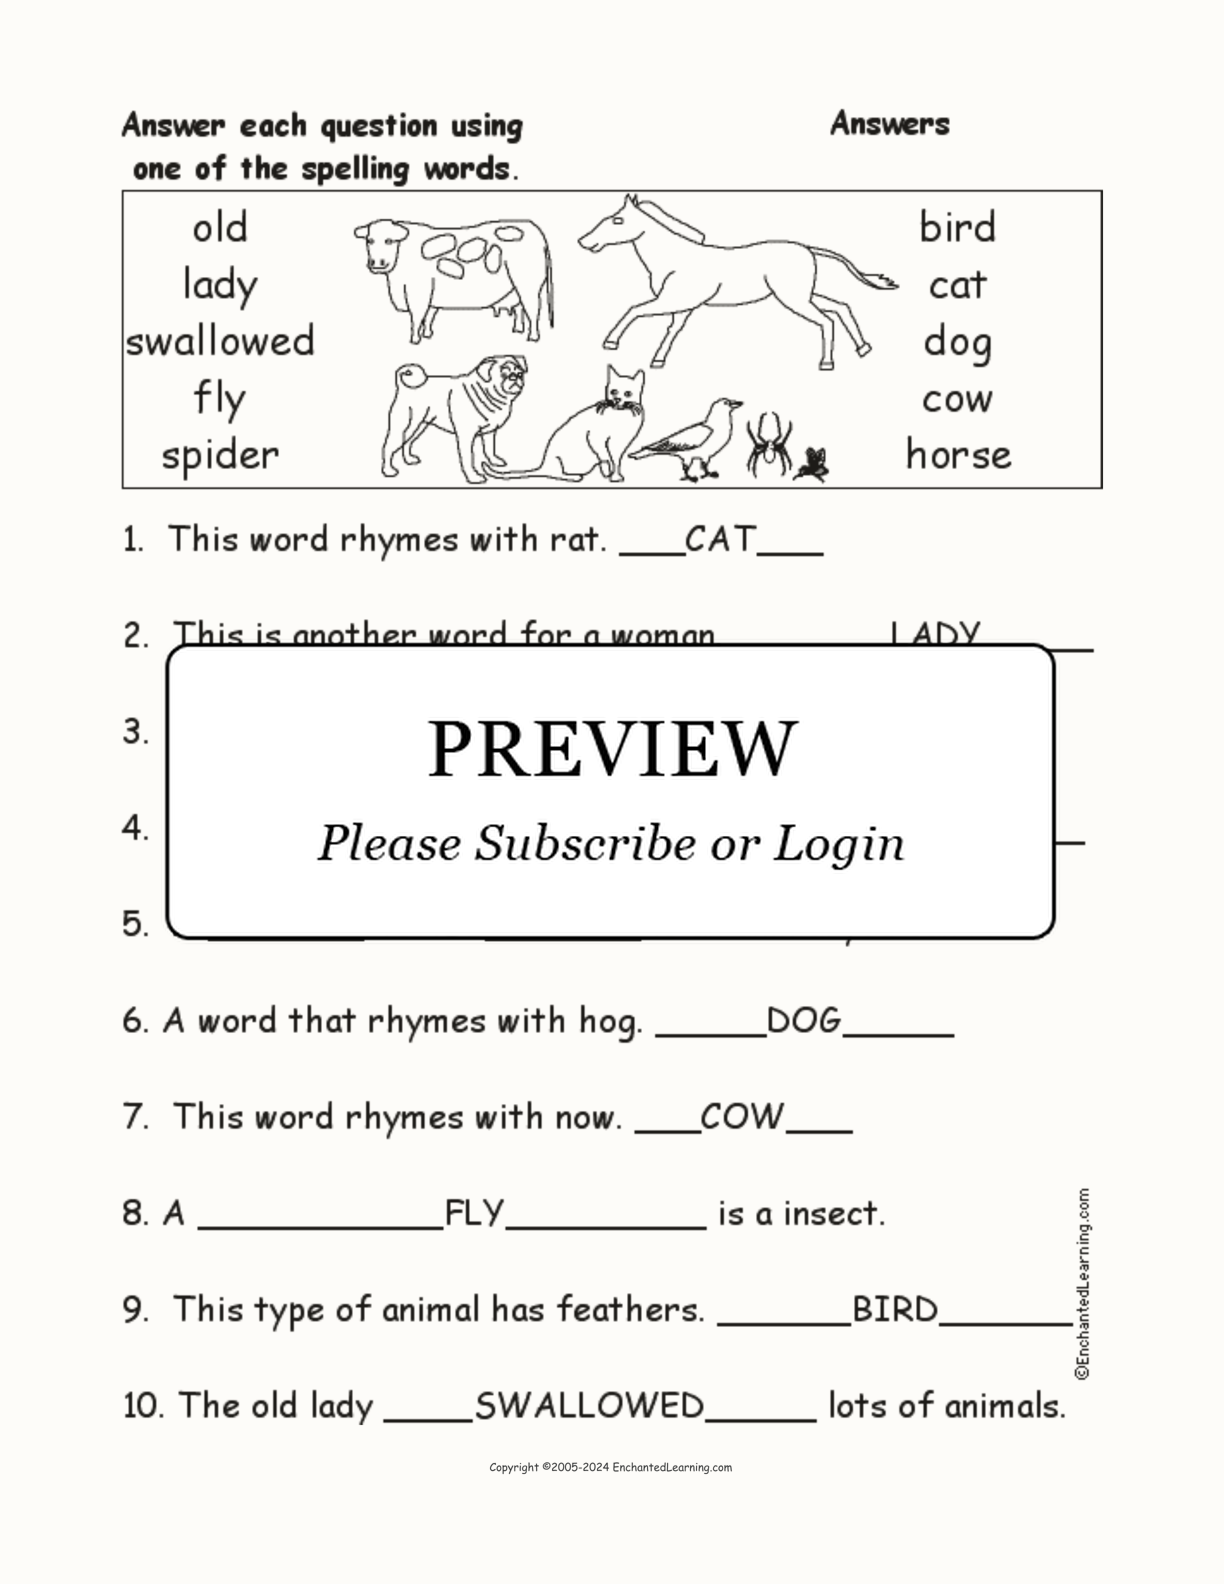 'The Old Lady and the Fly': Spelling Word Questions interactive worksheet page 2